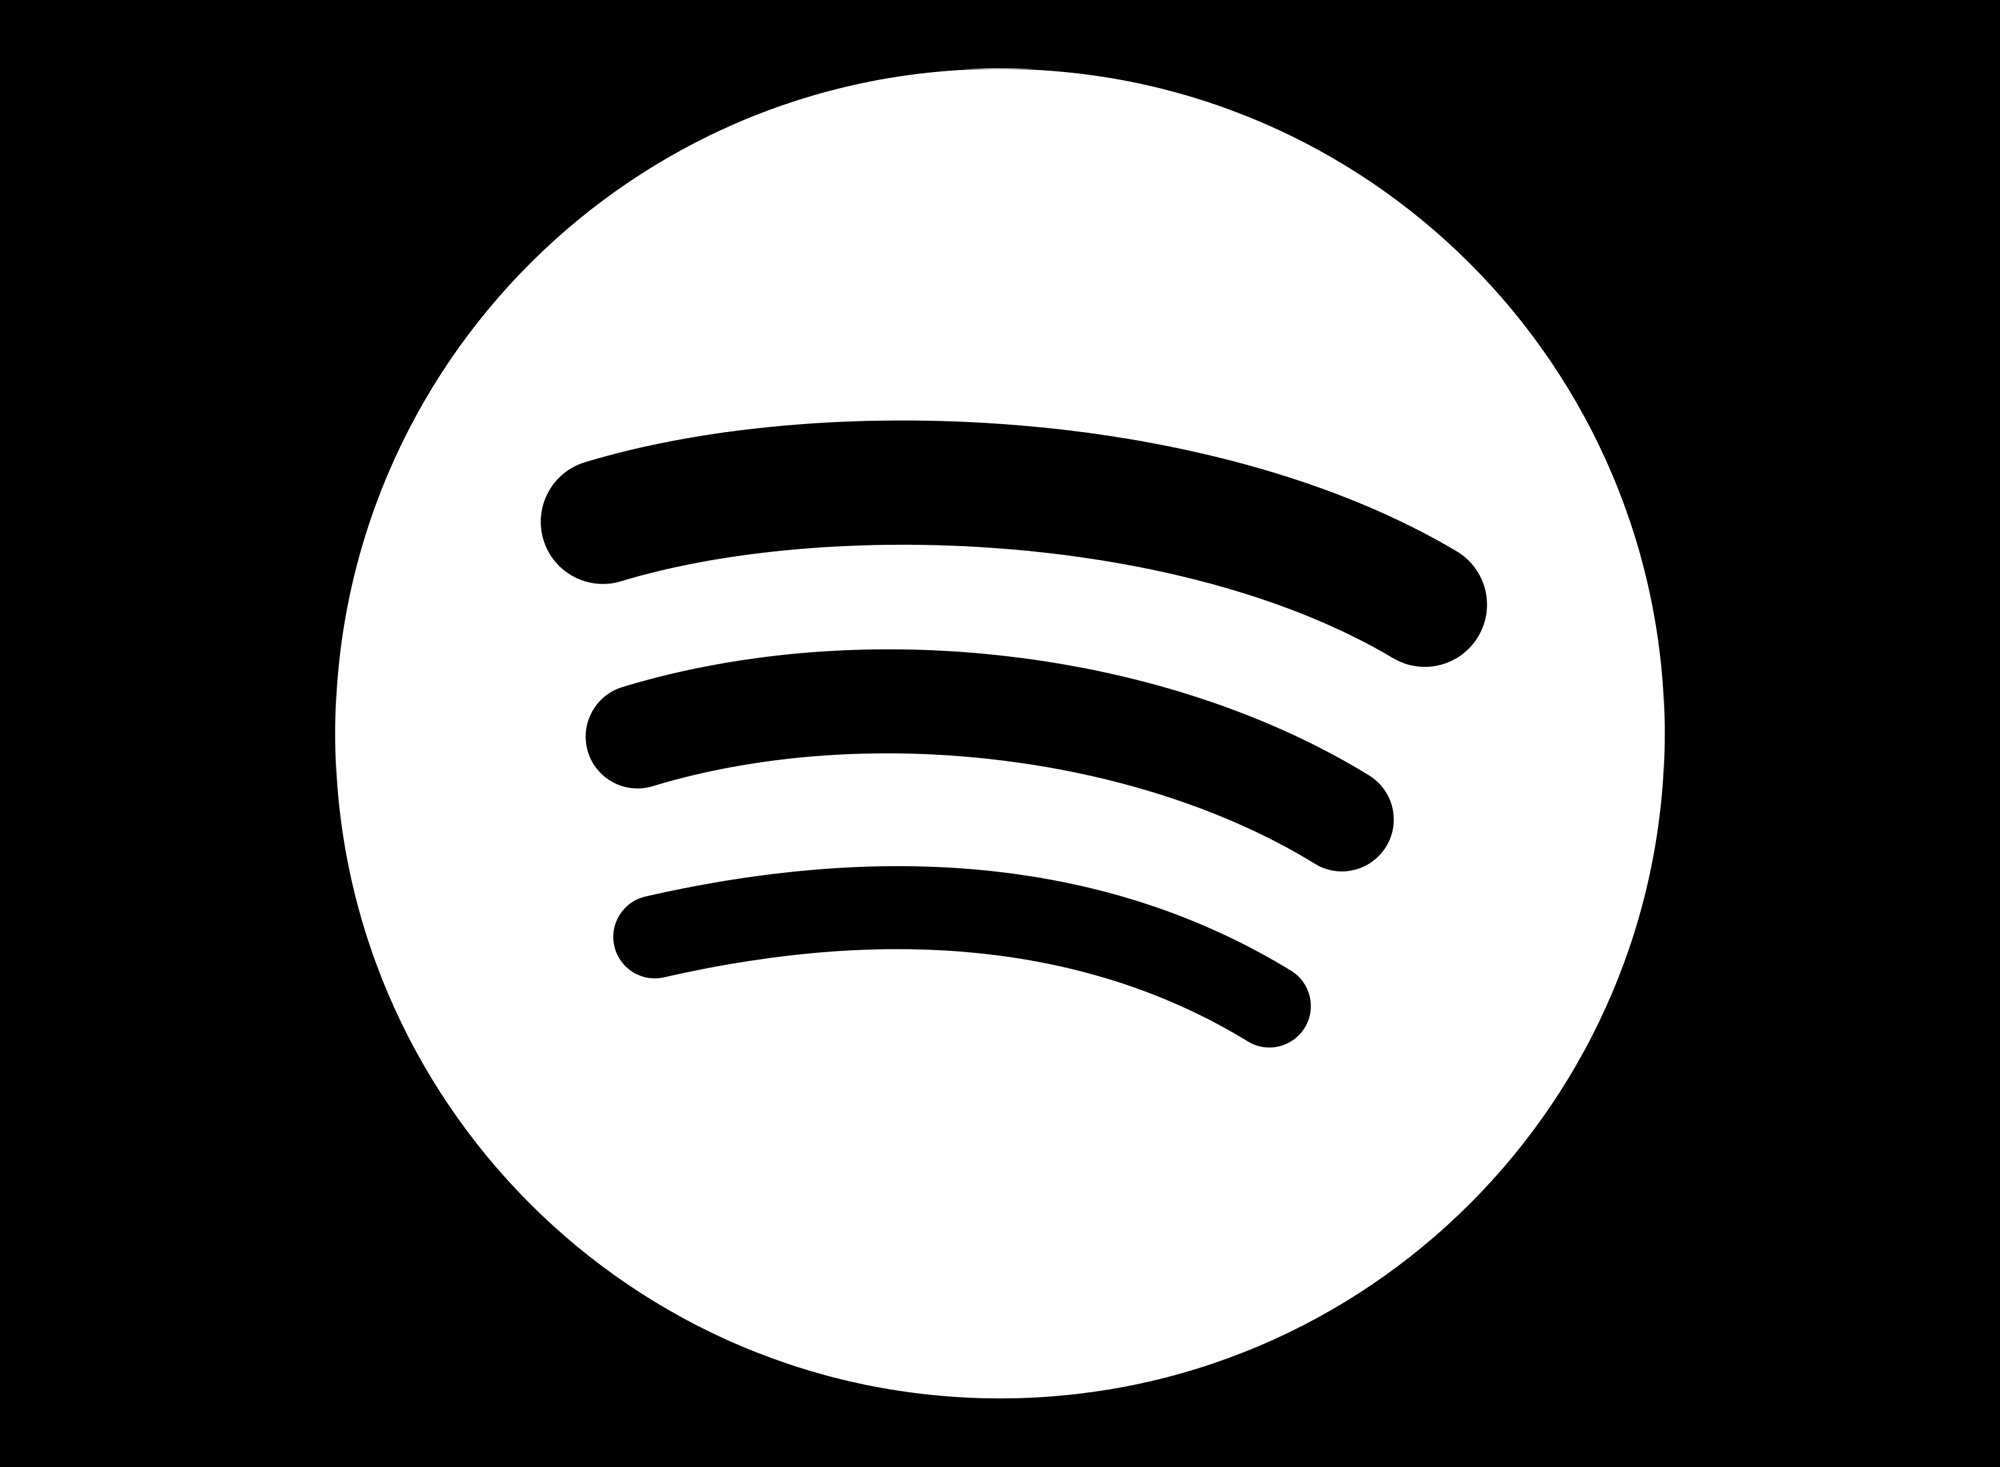 Spotify Logo, Spotify Symbol, Meaning, History and Evolution